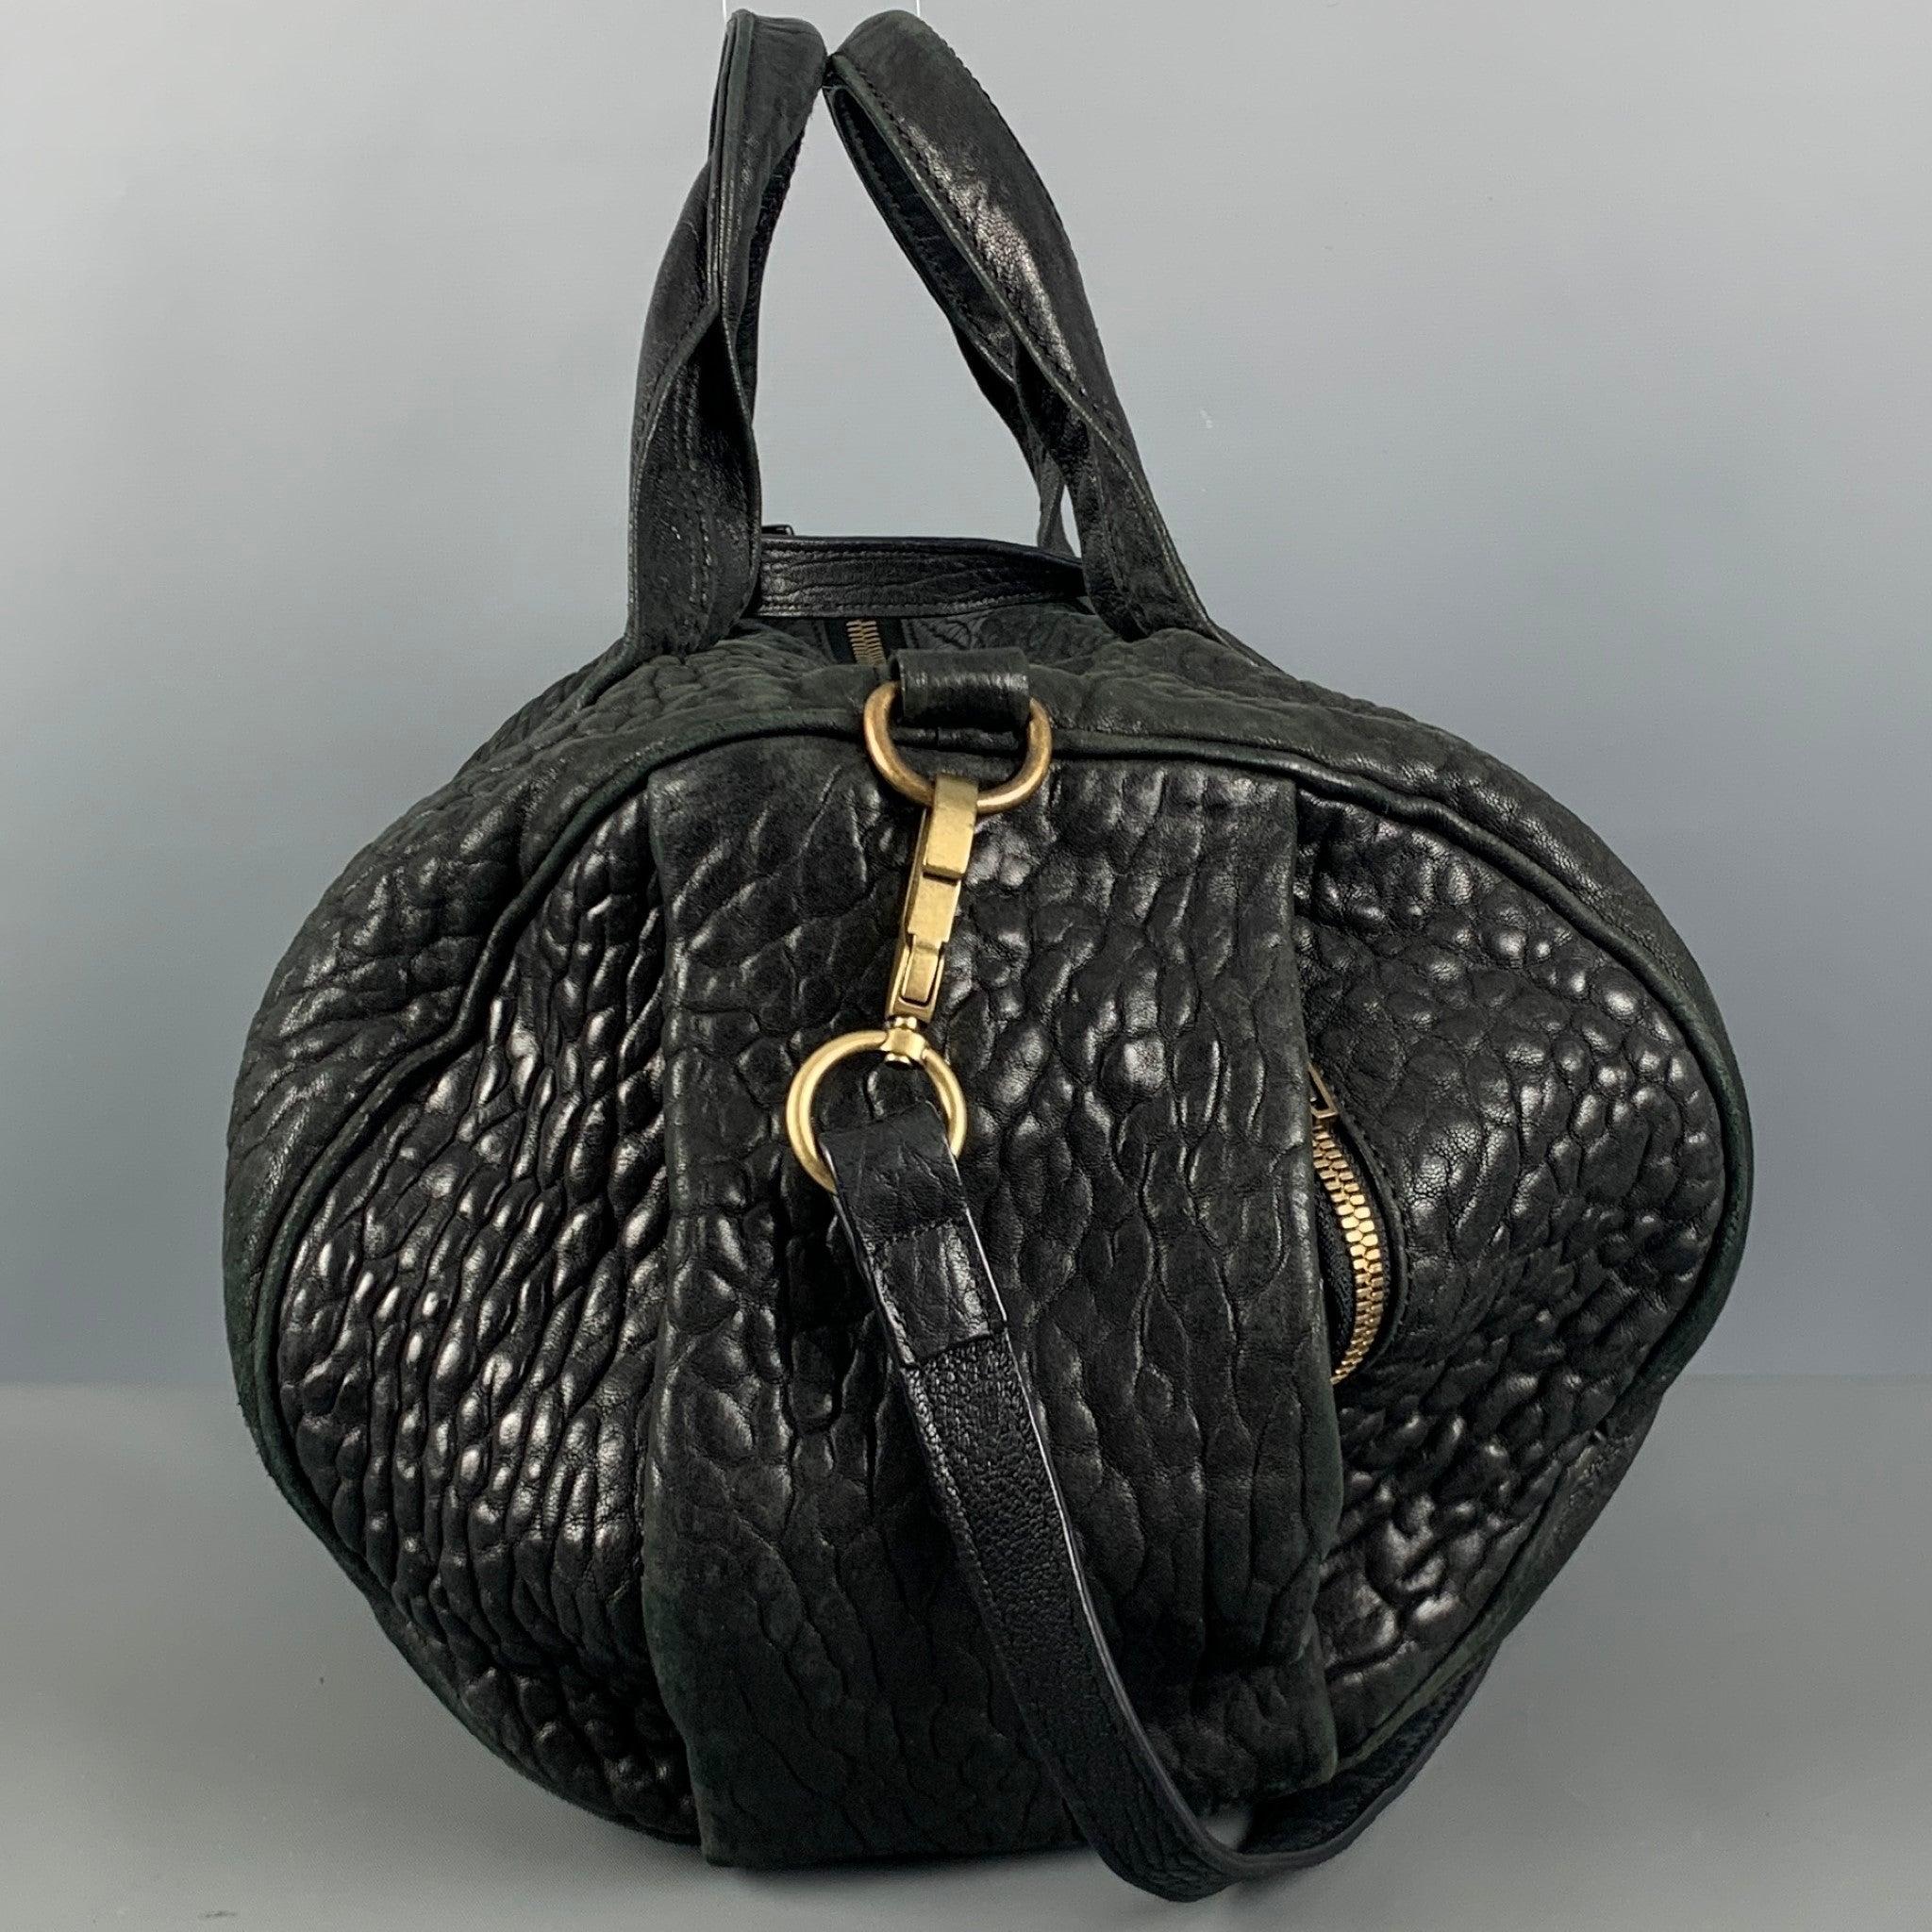 ALEXANDER WANG handbag comes in a black embossed leather featuring shoulder leather straps, copper tone hardware, inner pockets, and a zipper closure.Good Pre-Owned Condition. Moderate Signs of Wear. 

Measurements: 
  Length: 13 inches Width: 4.5